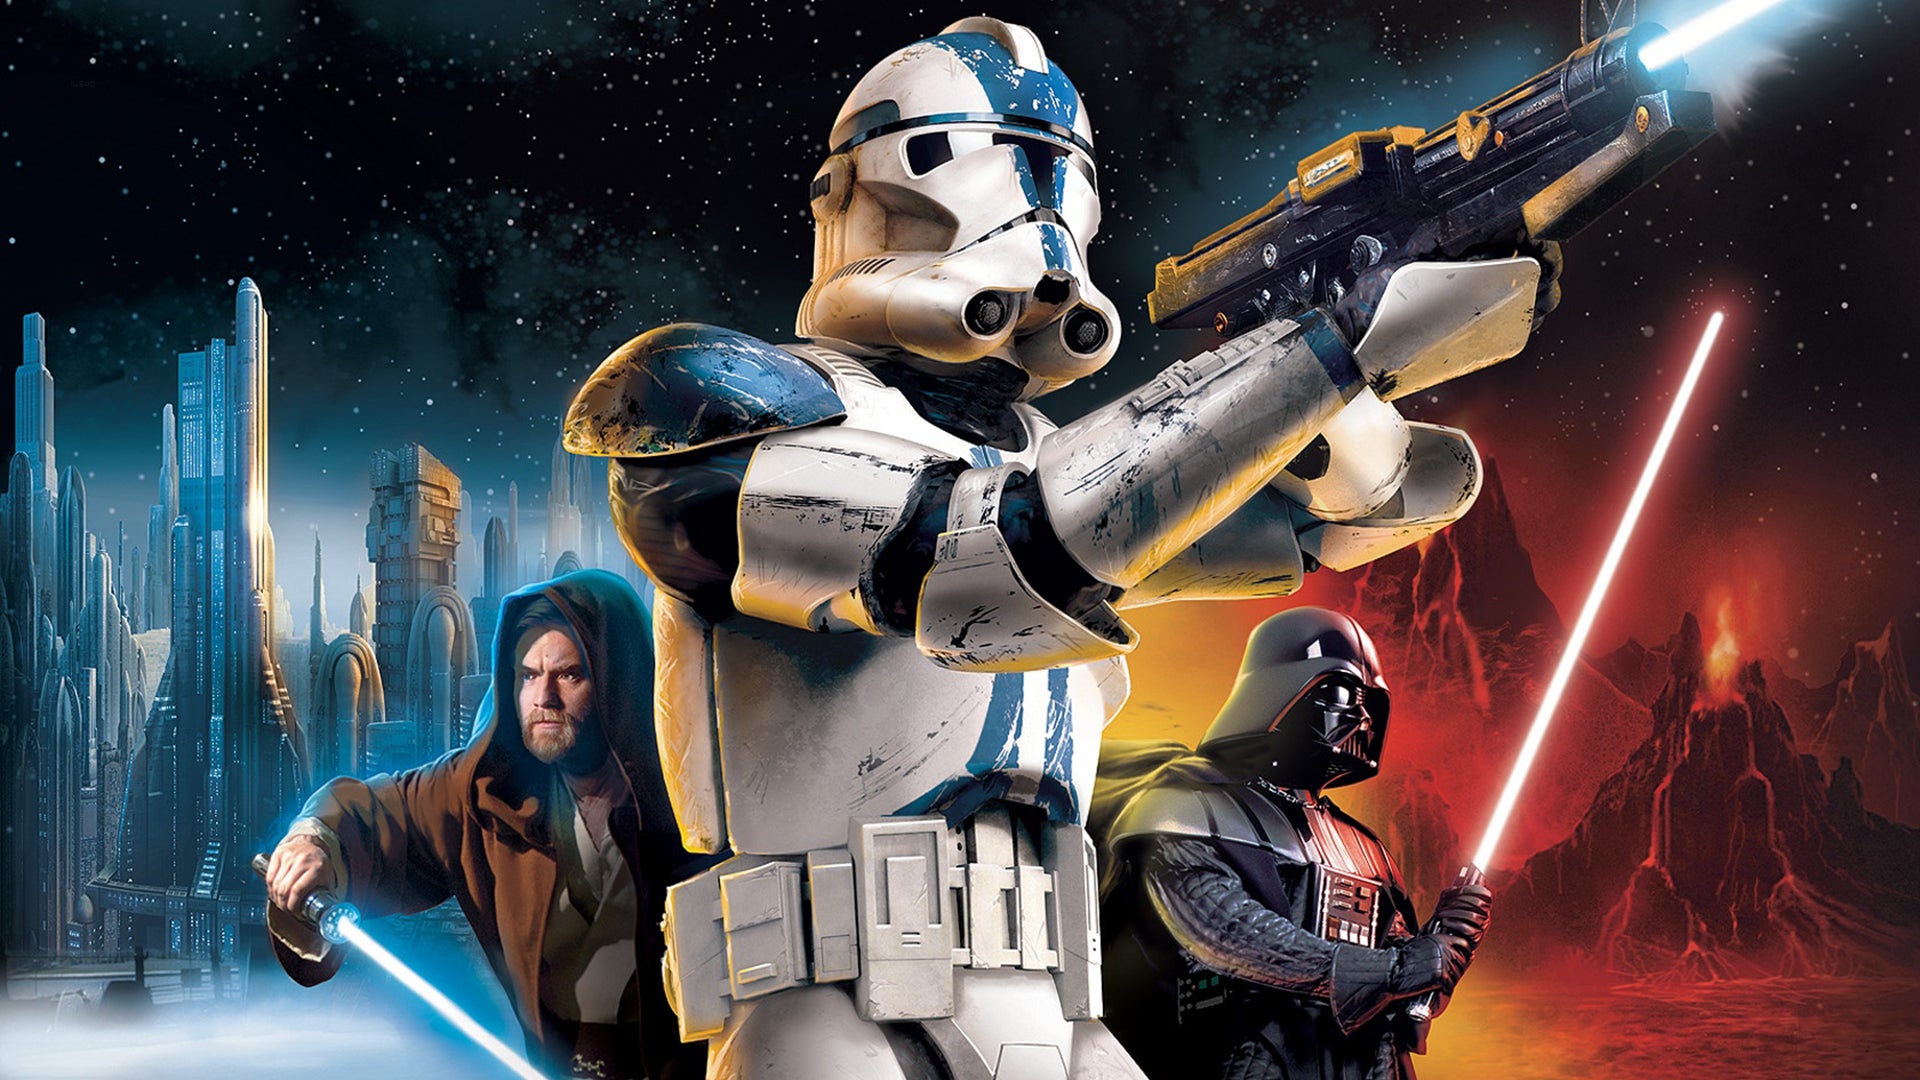 Star Wars Battlefront 2 artwork featuring, from left to right: Obi Wan, a Storm Trooper, and Darth Vader